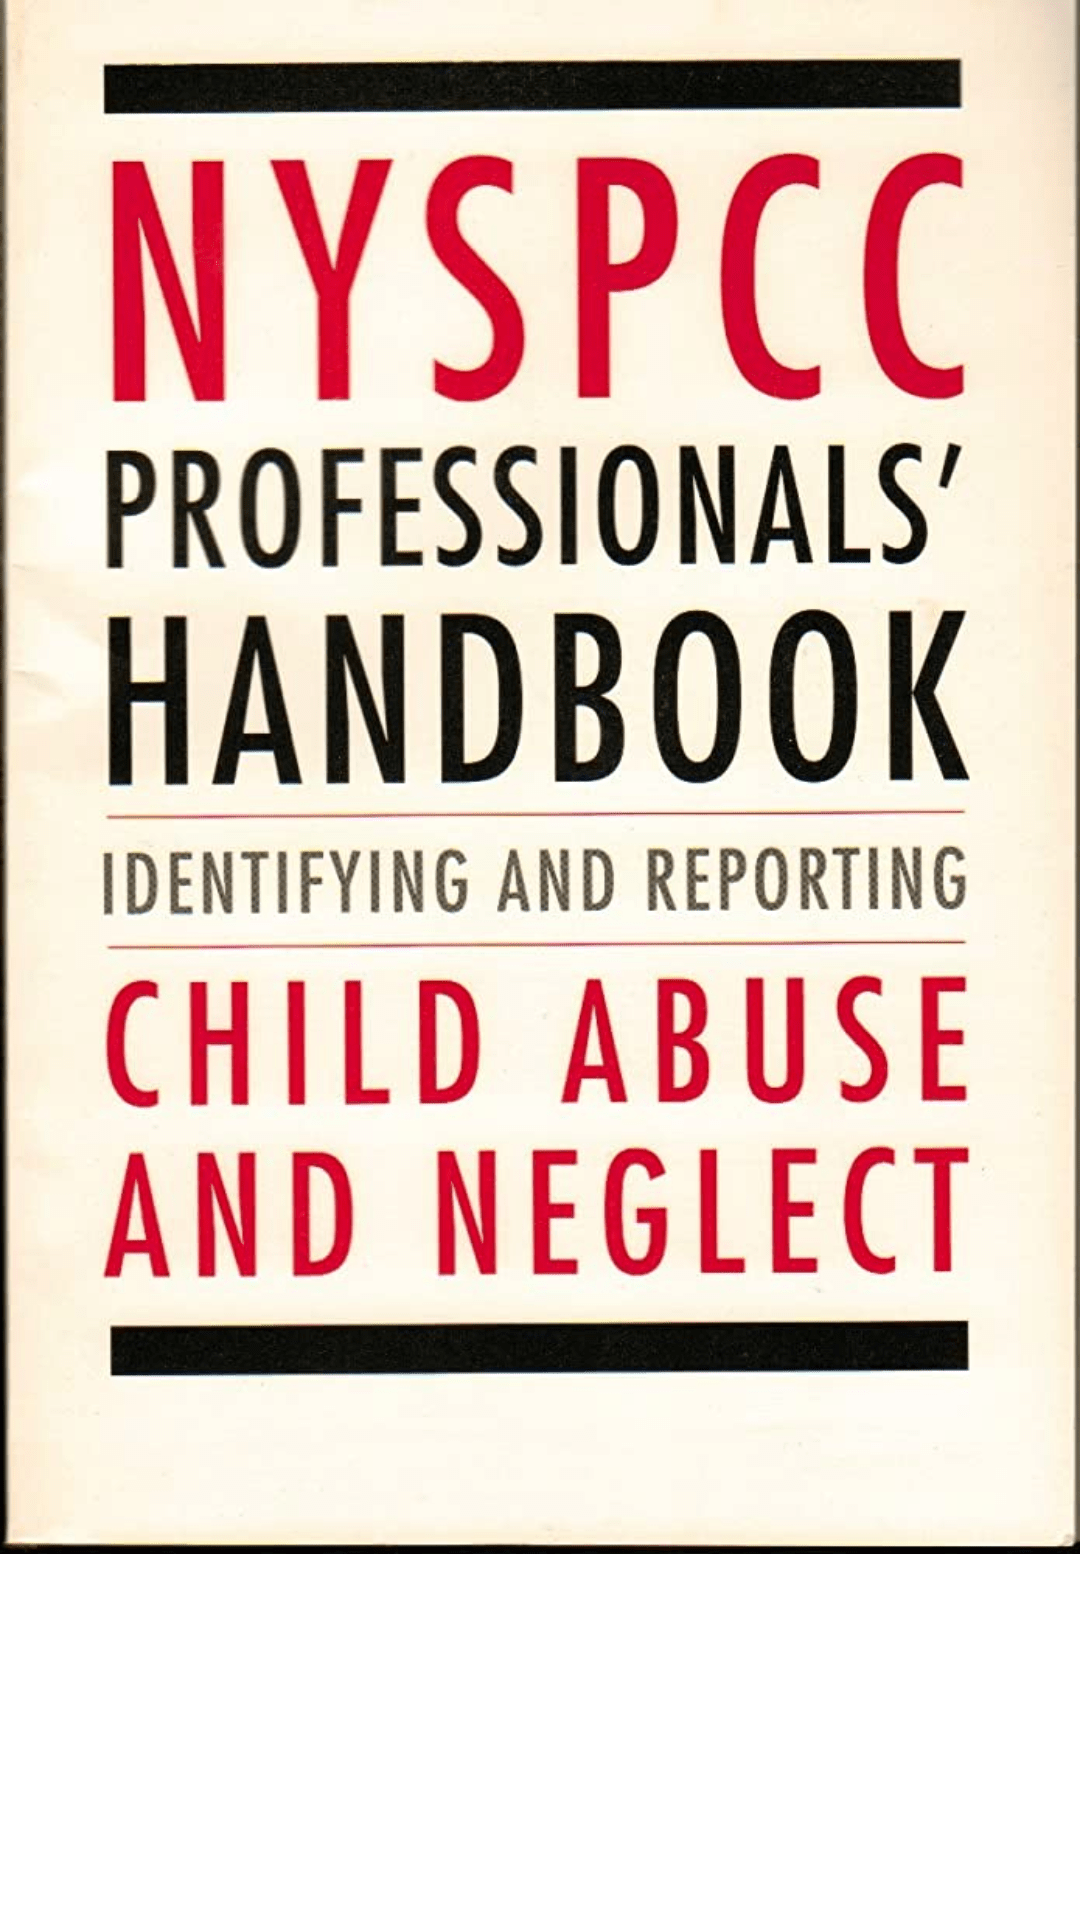 NYSPCC Professionals' Handbook: Identifying and Reporting Child Abuse and Neglect